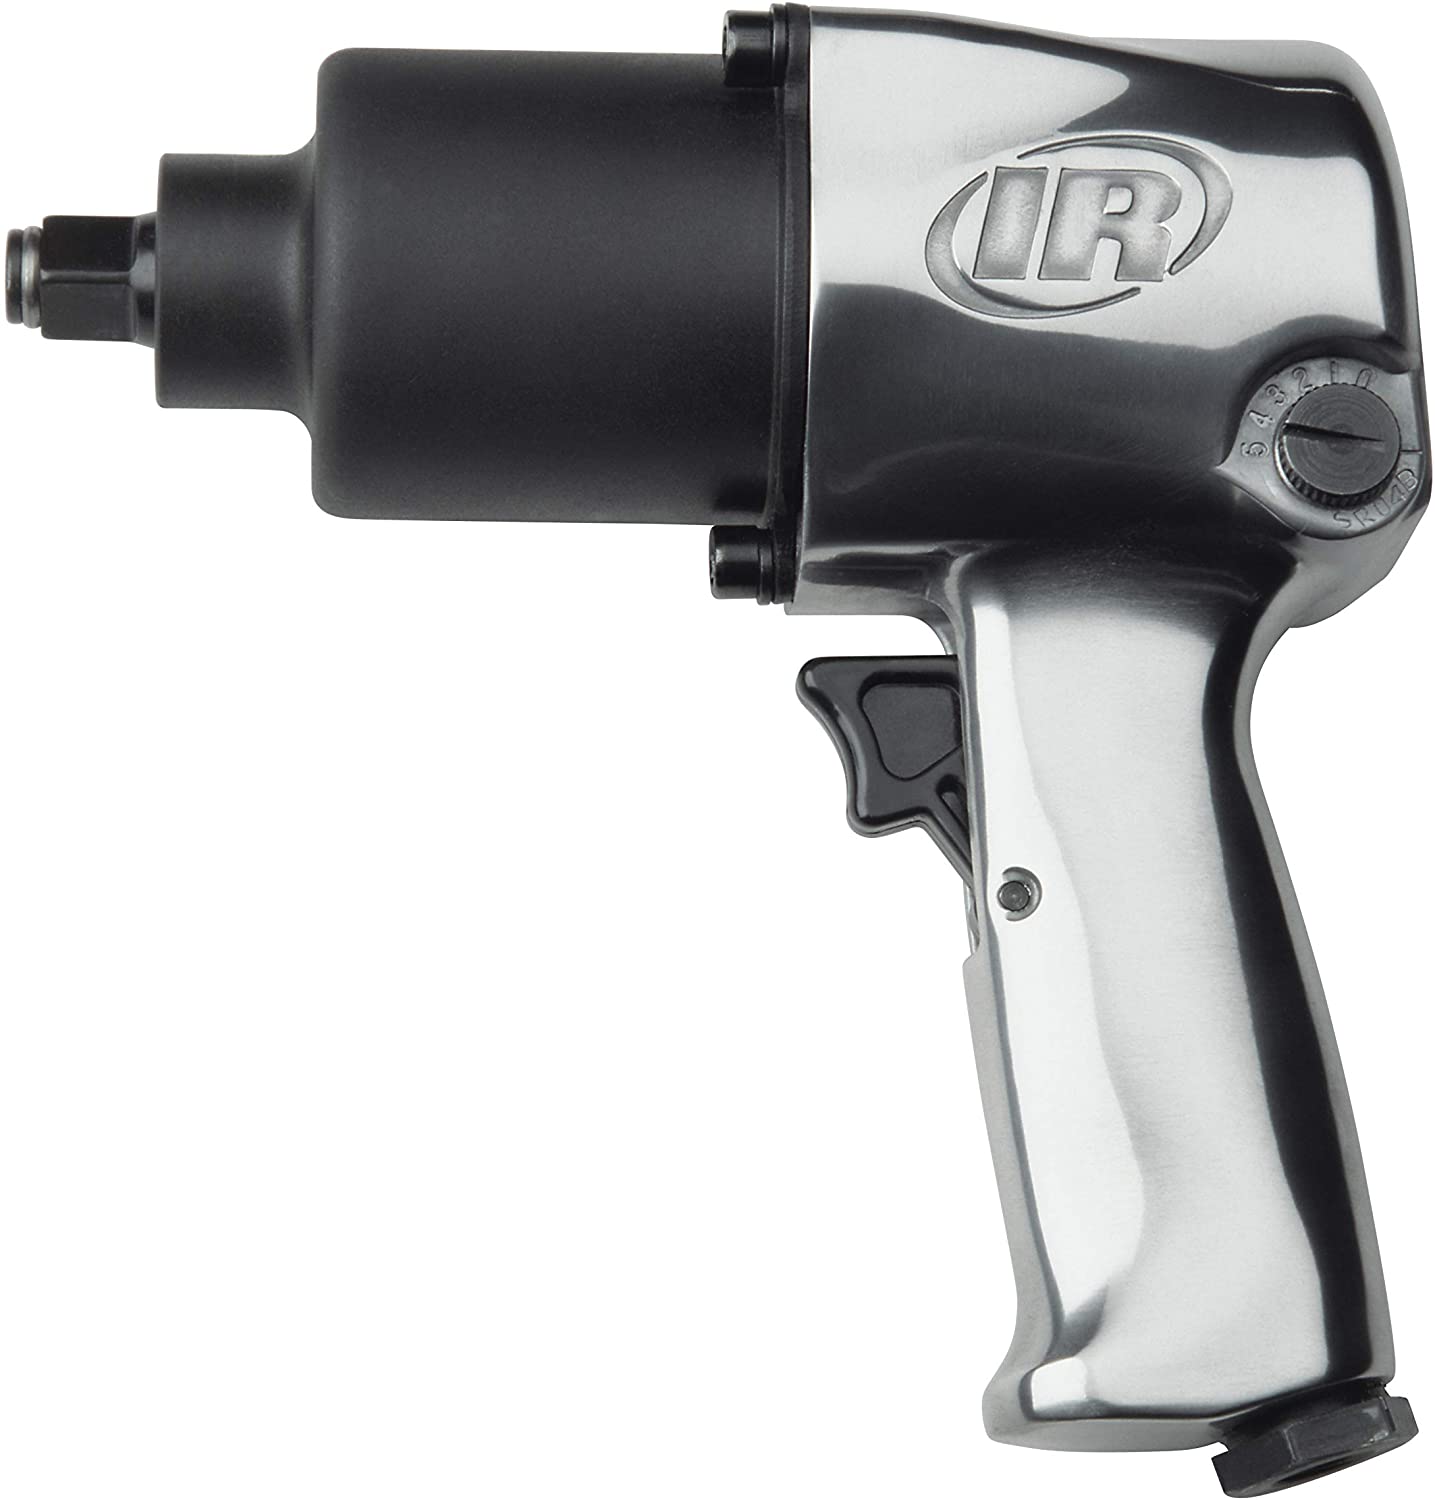 Ingersoll Rand 231C Super-Duty Air Impact Wrench, 1/2 Inch